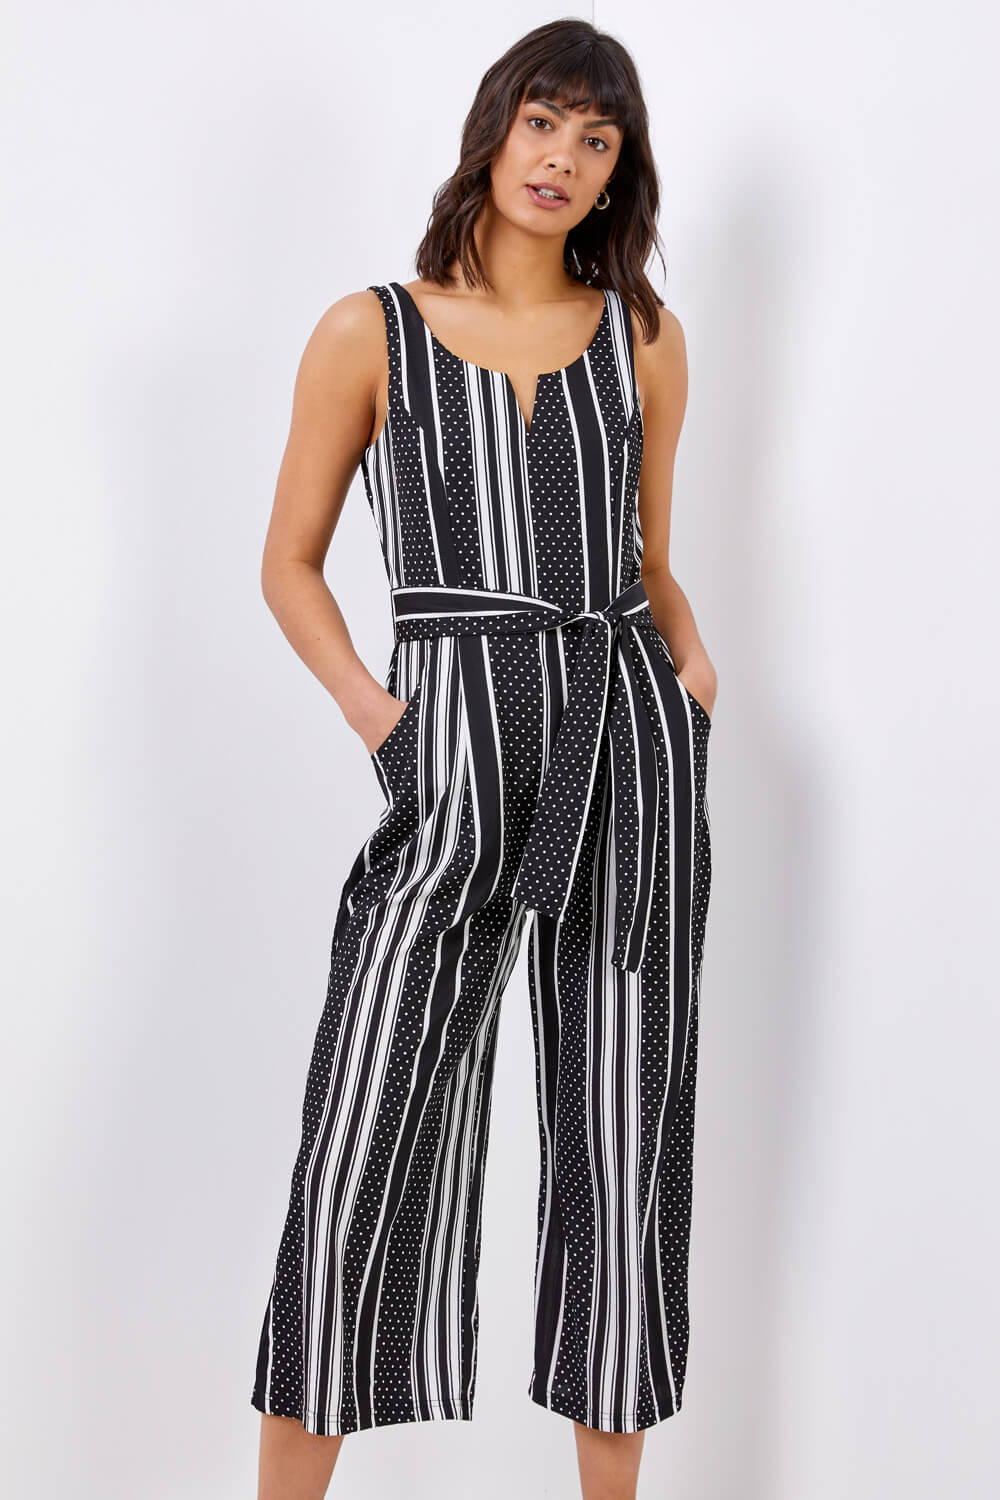 Buy Black Jumpsuits Playsuits for Women by THE BLACK LOVER Online   Ajiocom